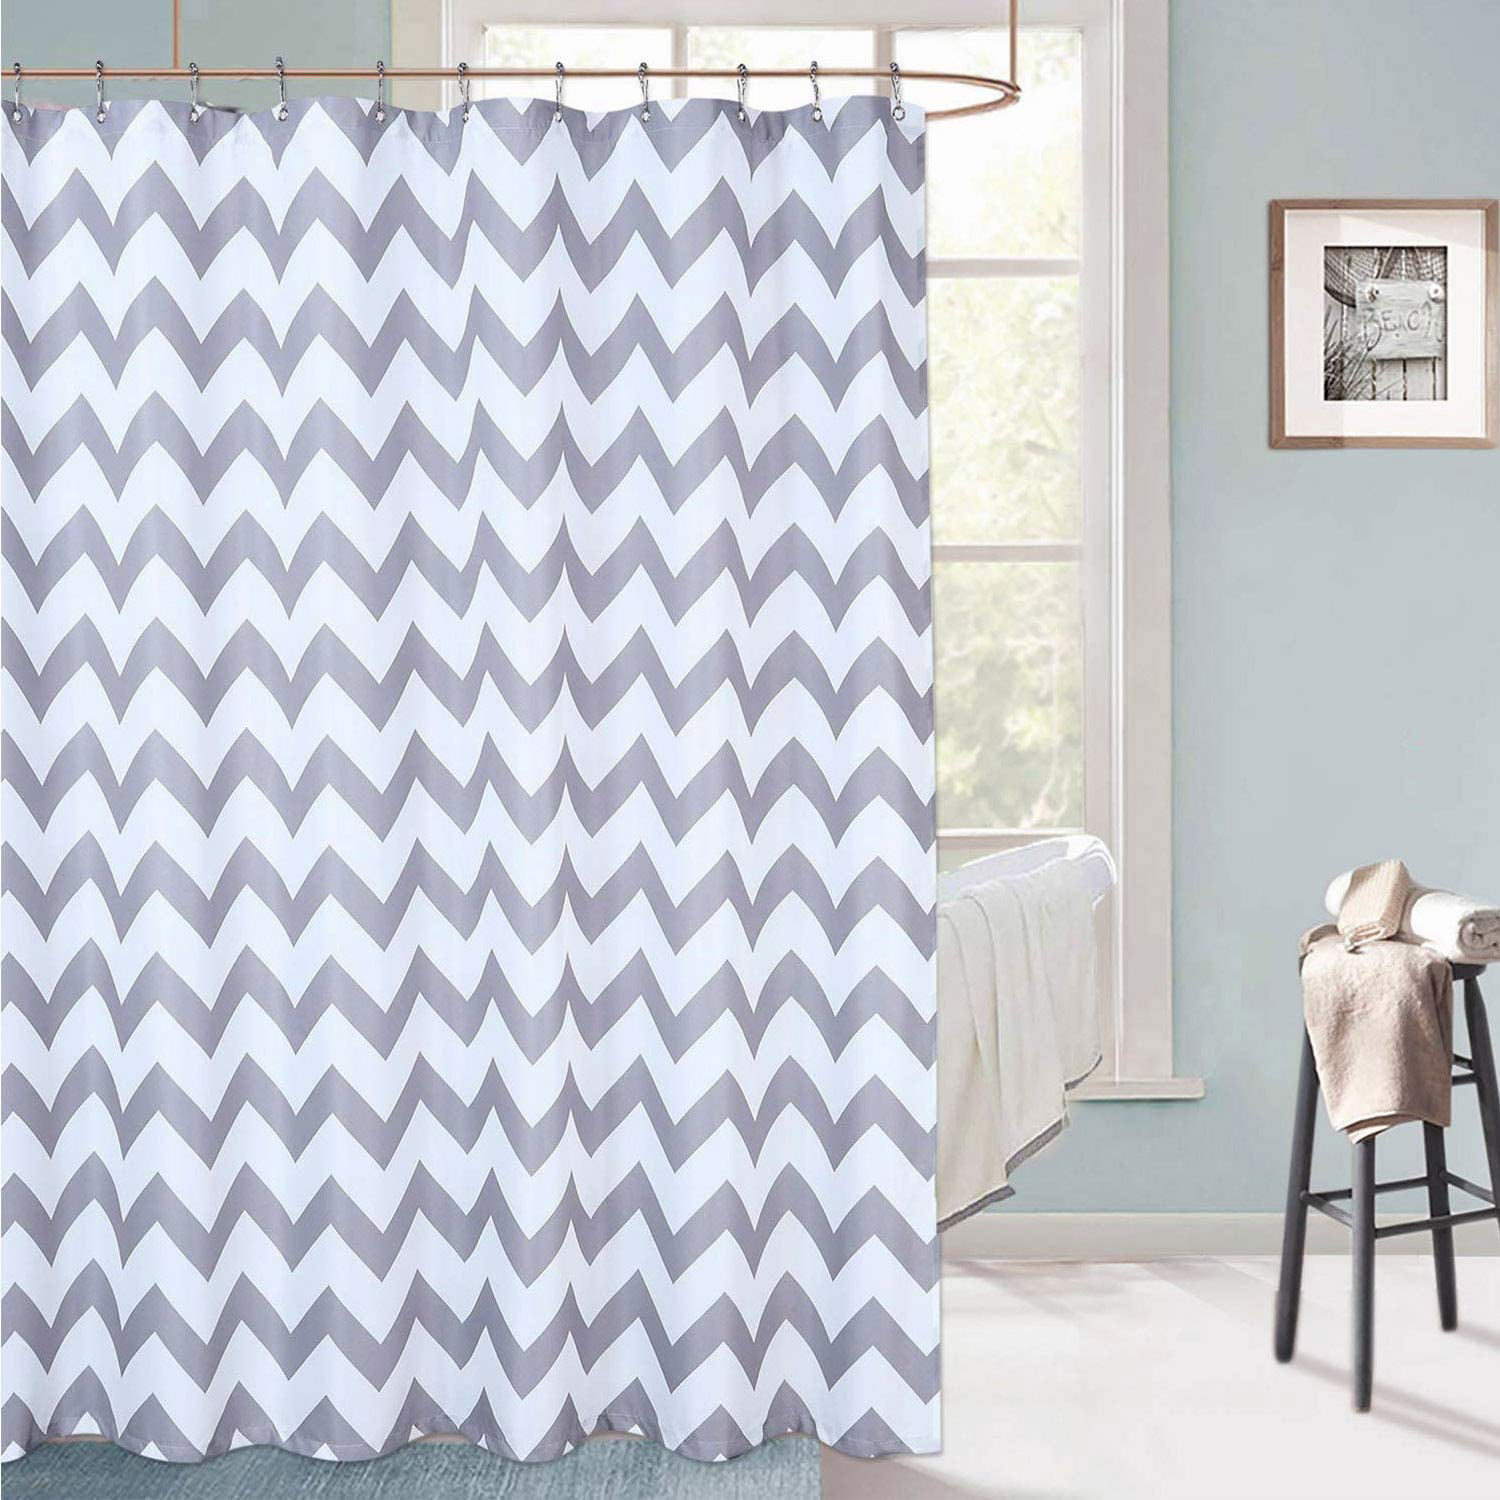 Details about   Gray Tan Chevron Zigzag Pattern Fabric Bath Shower Curtain 84 Inch Extra Long 